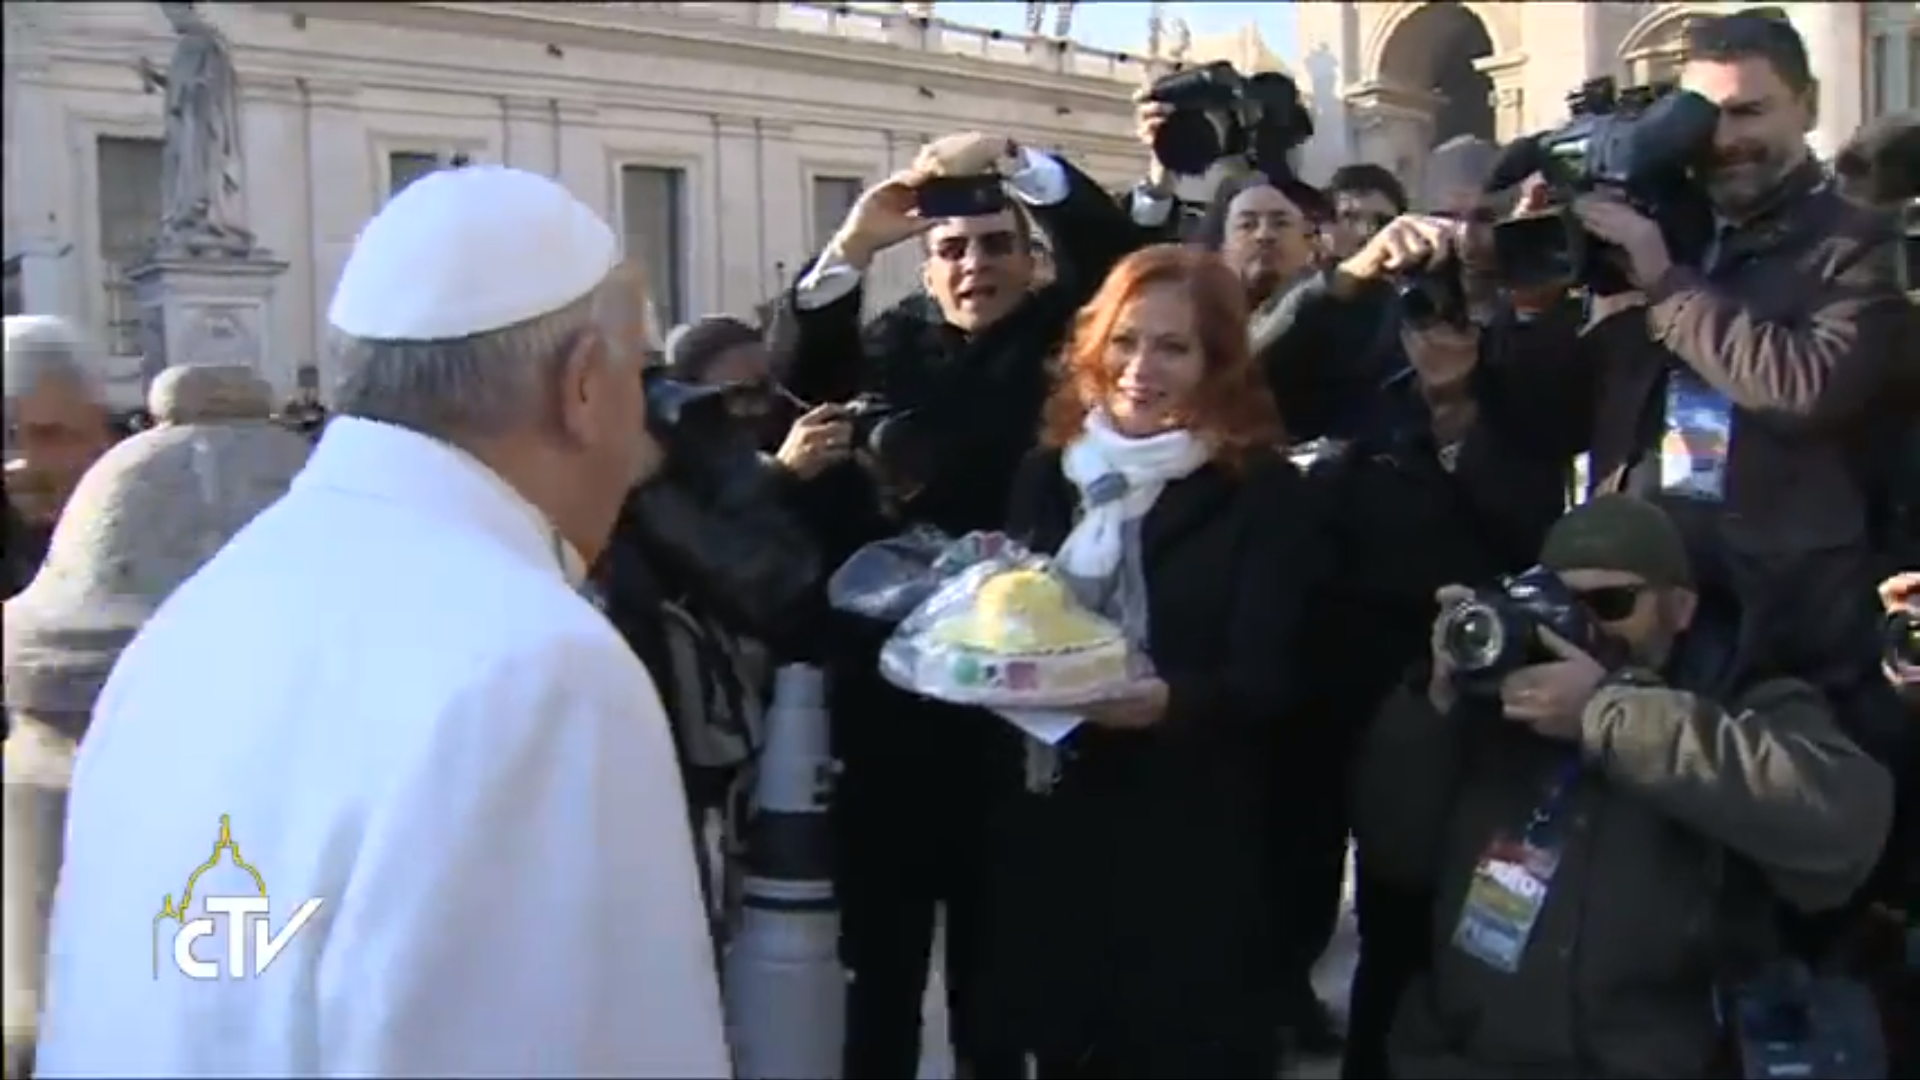 A "sombrero" for the Pope's 79th birthday